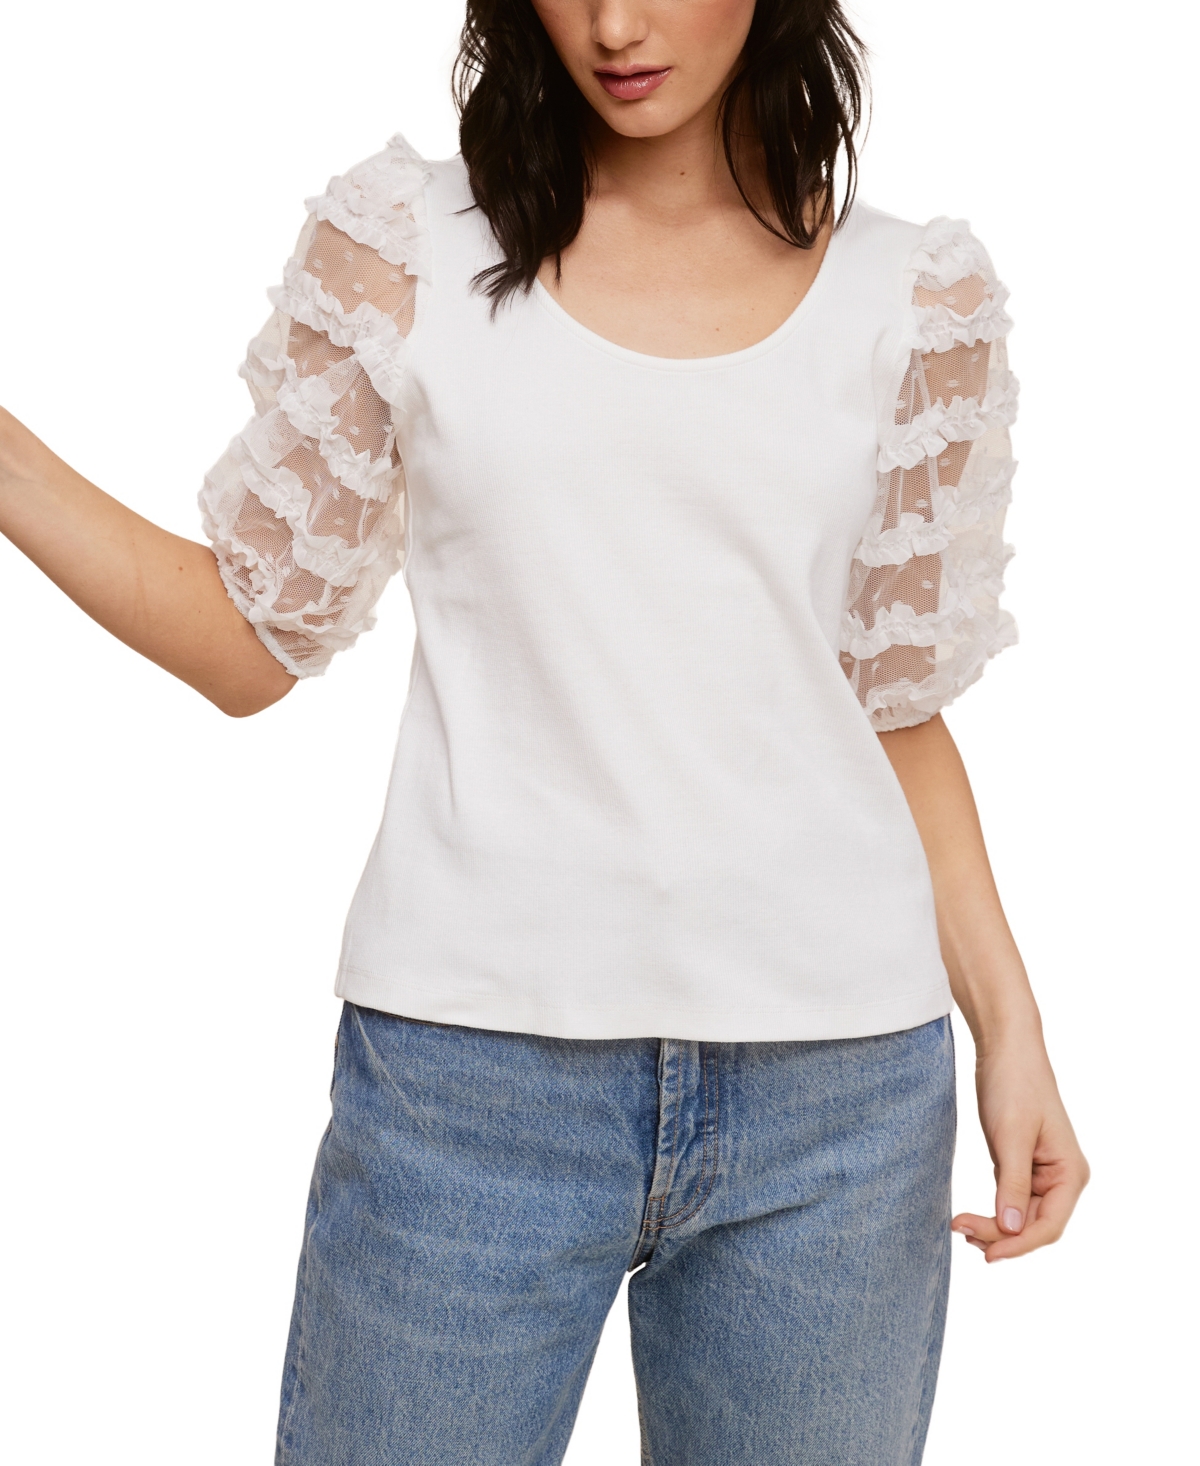 Ribbed Knit Top With Ruffle Mesh Puff Sleeve - BRIGHT WHITE